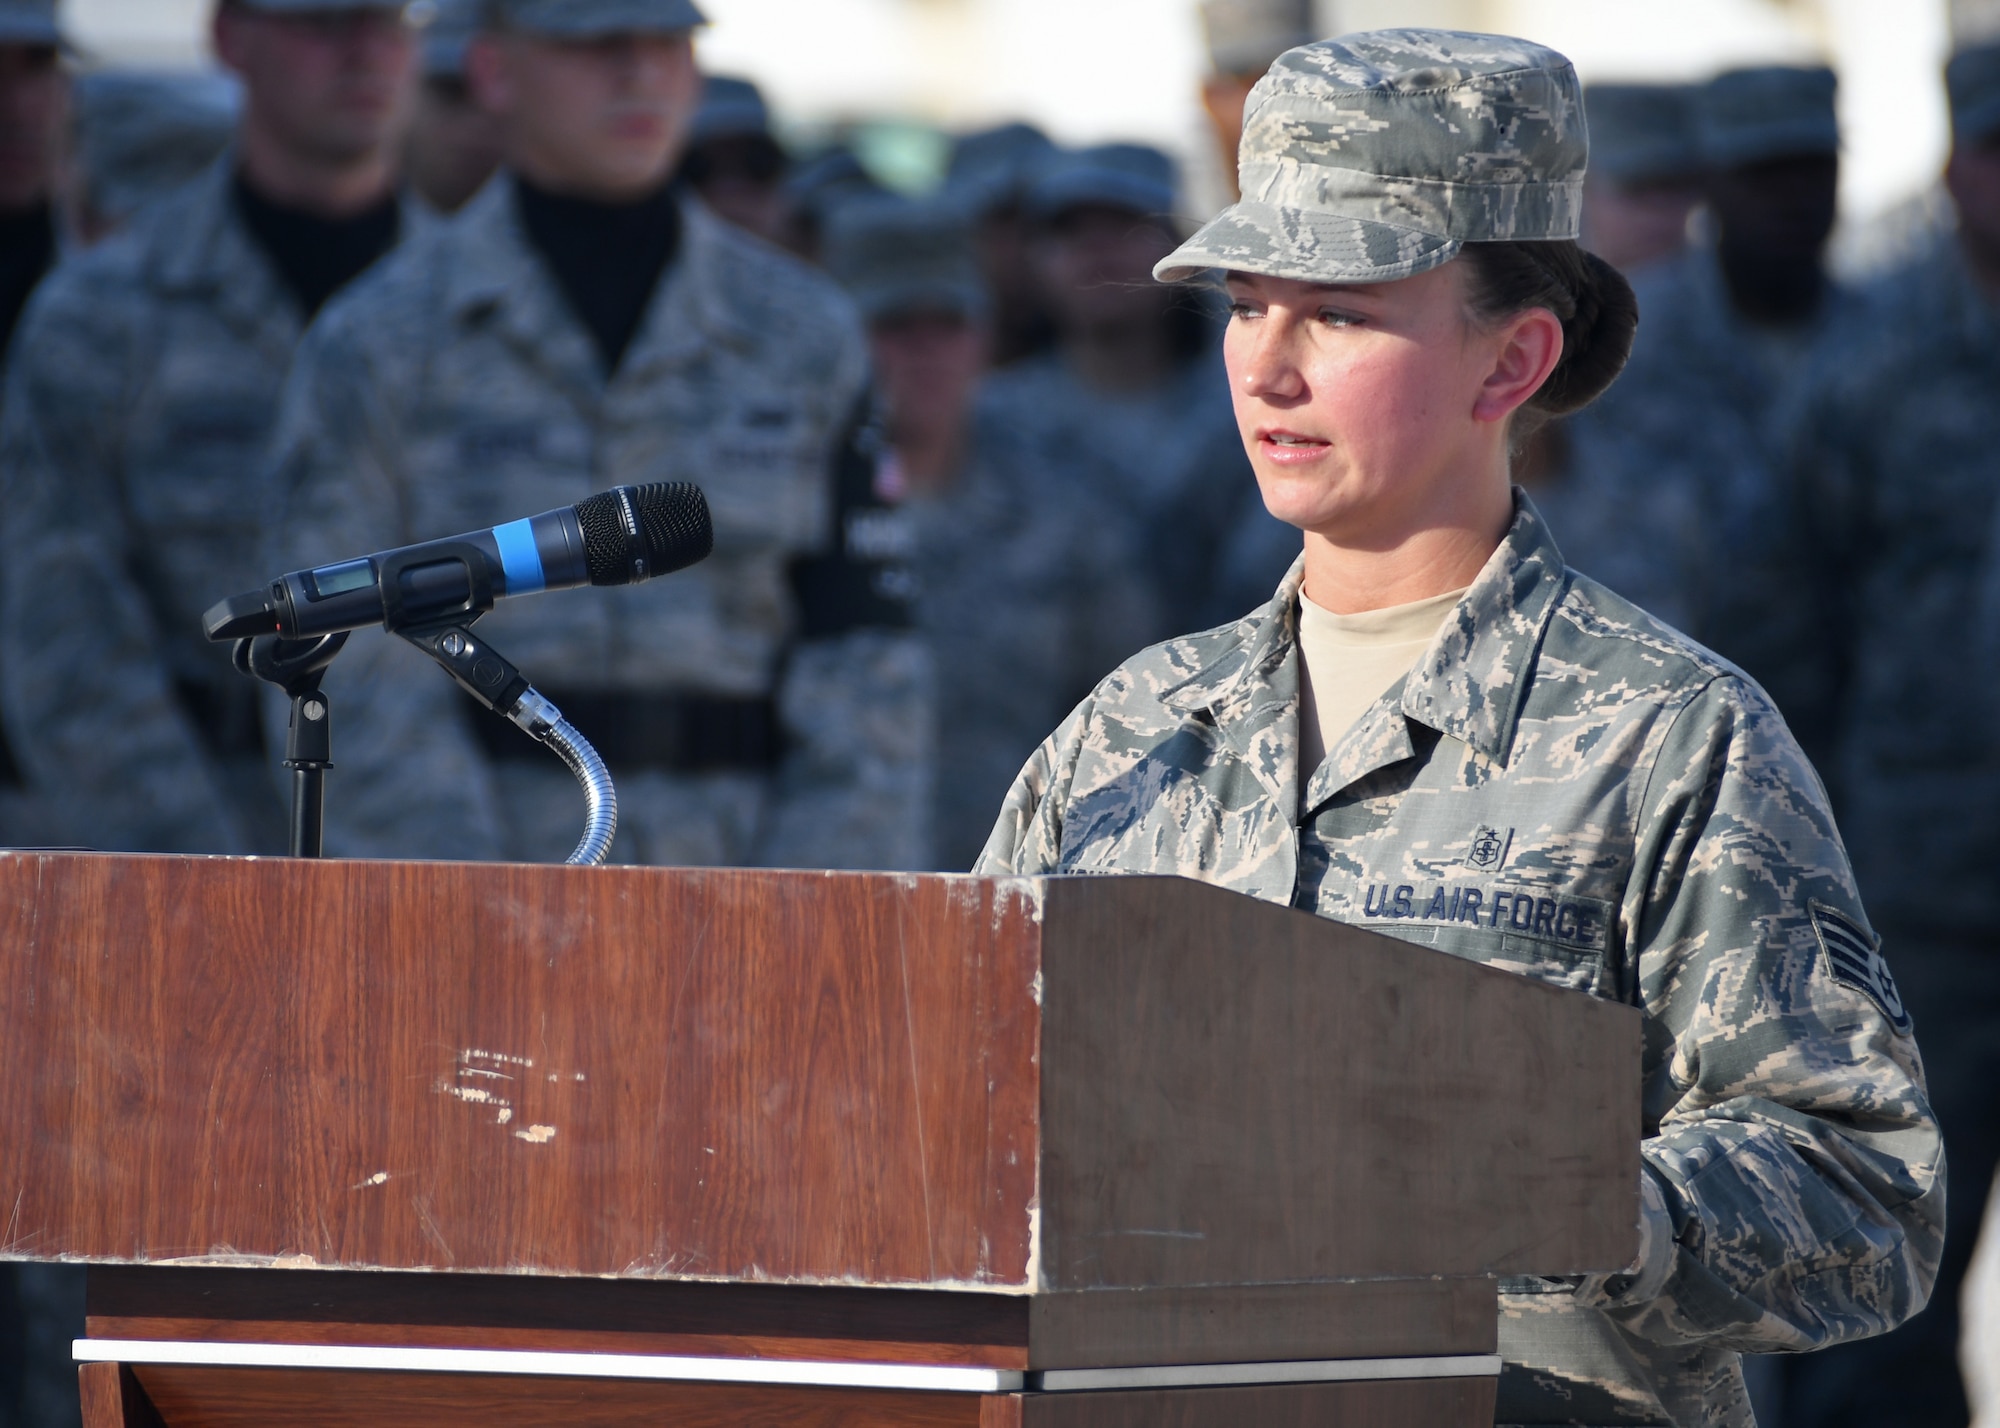 U.S. Air Force Staff Sgt. April Young, 379th Expeditionary Medical Group intra-theatre care program NCO in-charge, narrates during the Veterans Day retreat ceremony at Al Udeid Air Base, Qatar, Nov. 11, 2016. Veterans Day is a day that honors the service and sacrifice of U.S. veterans, both past and present. (U.S. Air Force photo by Senior Airman Miles Wilson)